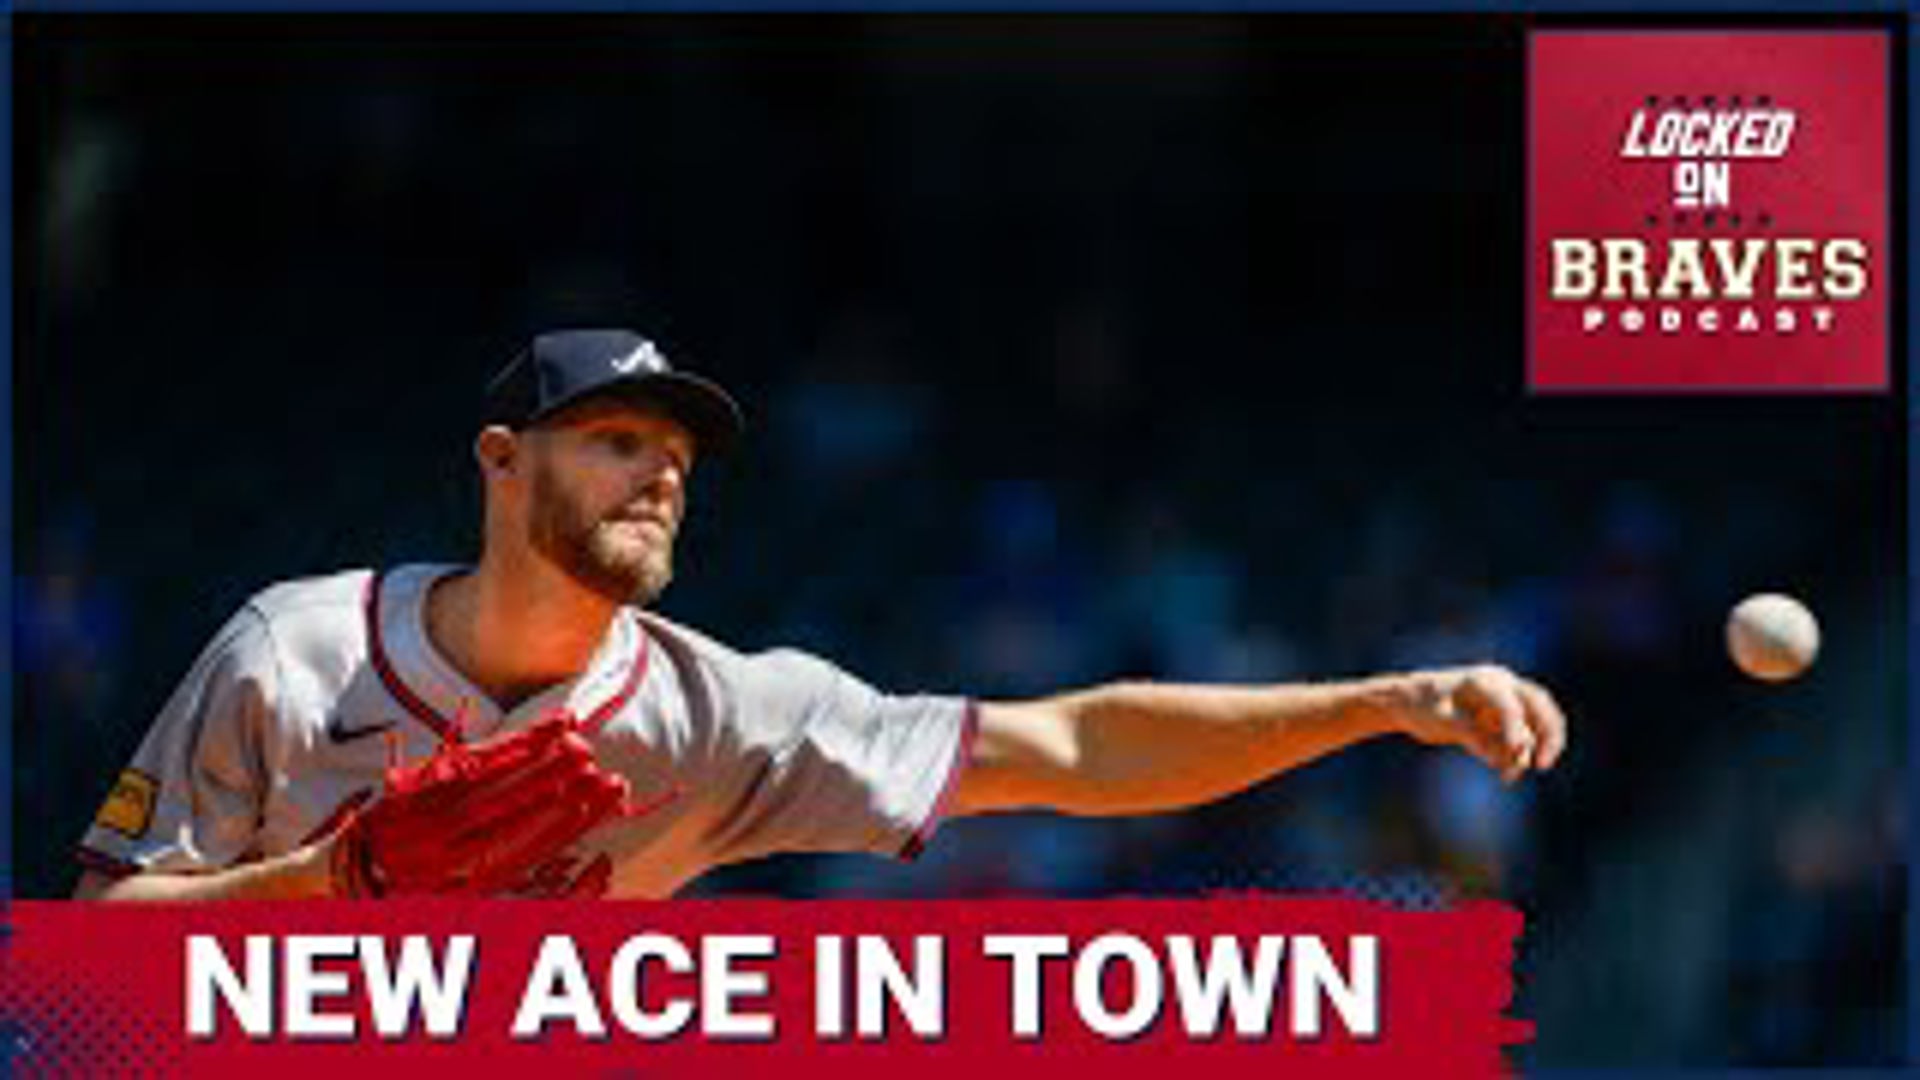 After the start to the season that Chris Sale has had, many fans are asking if he is the new ace of the Atlanta Braves.